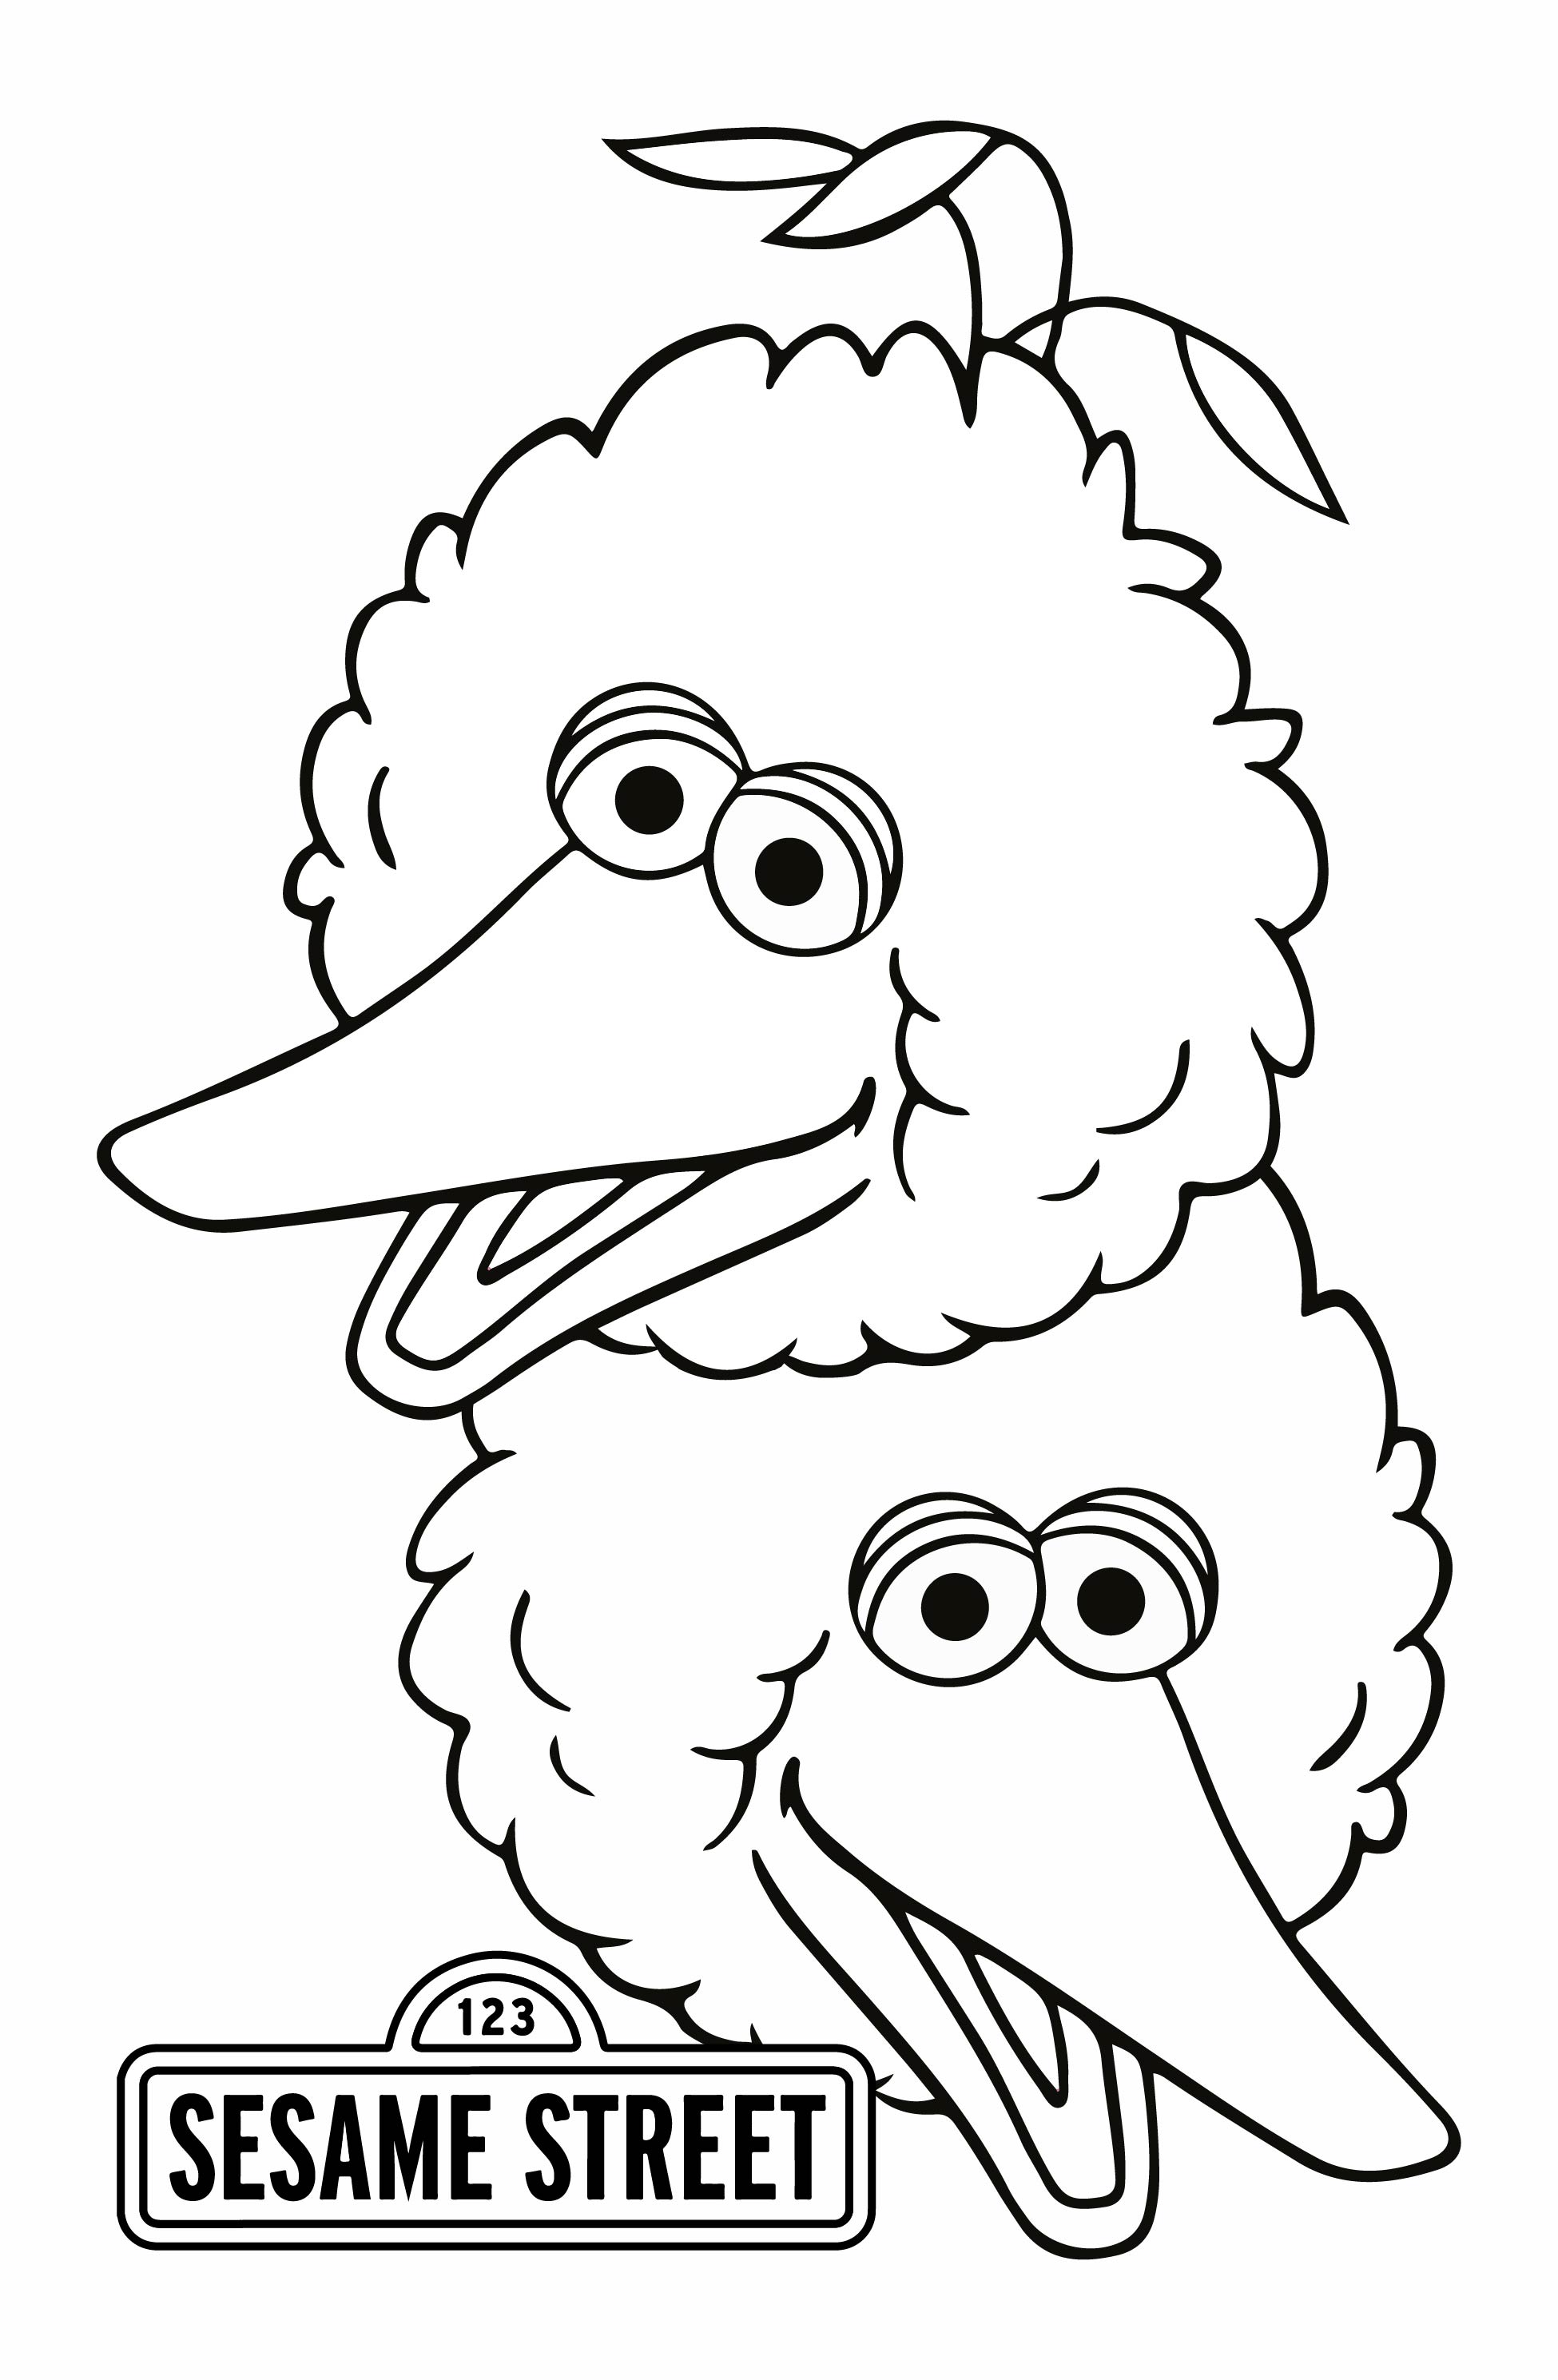 Best big bird face printable pdf for free at